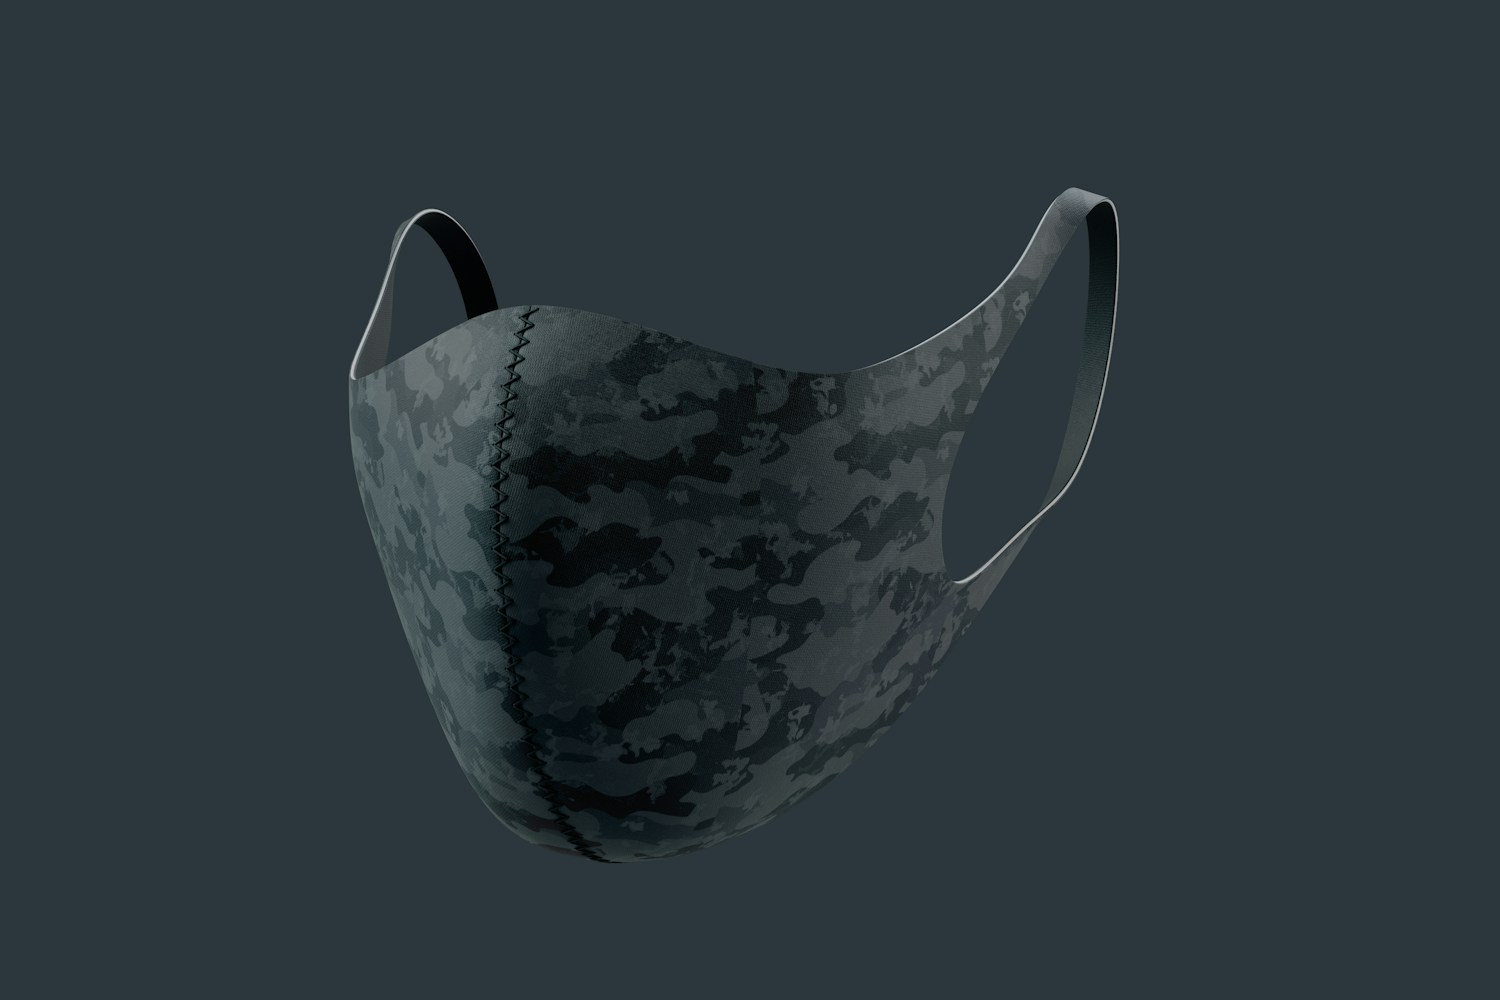 Neoprene Guard Face Mask Mockup, 3/4 Front Right View 02